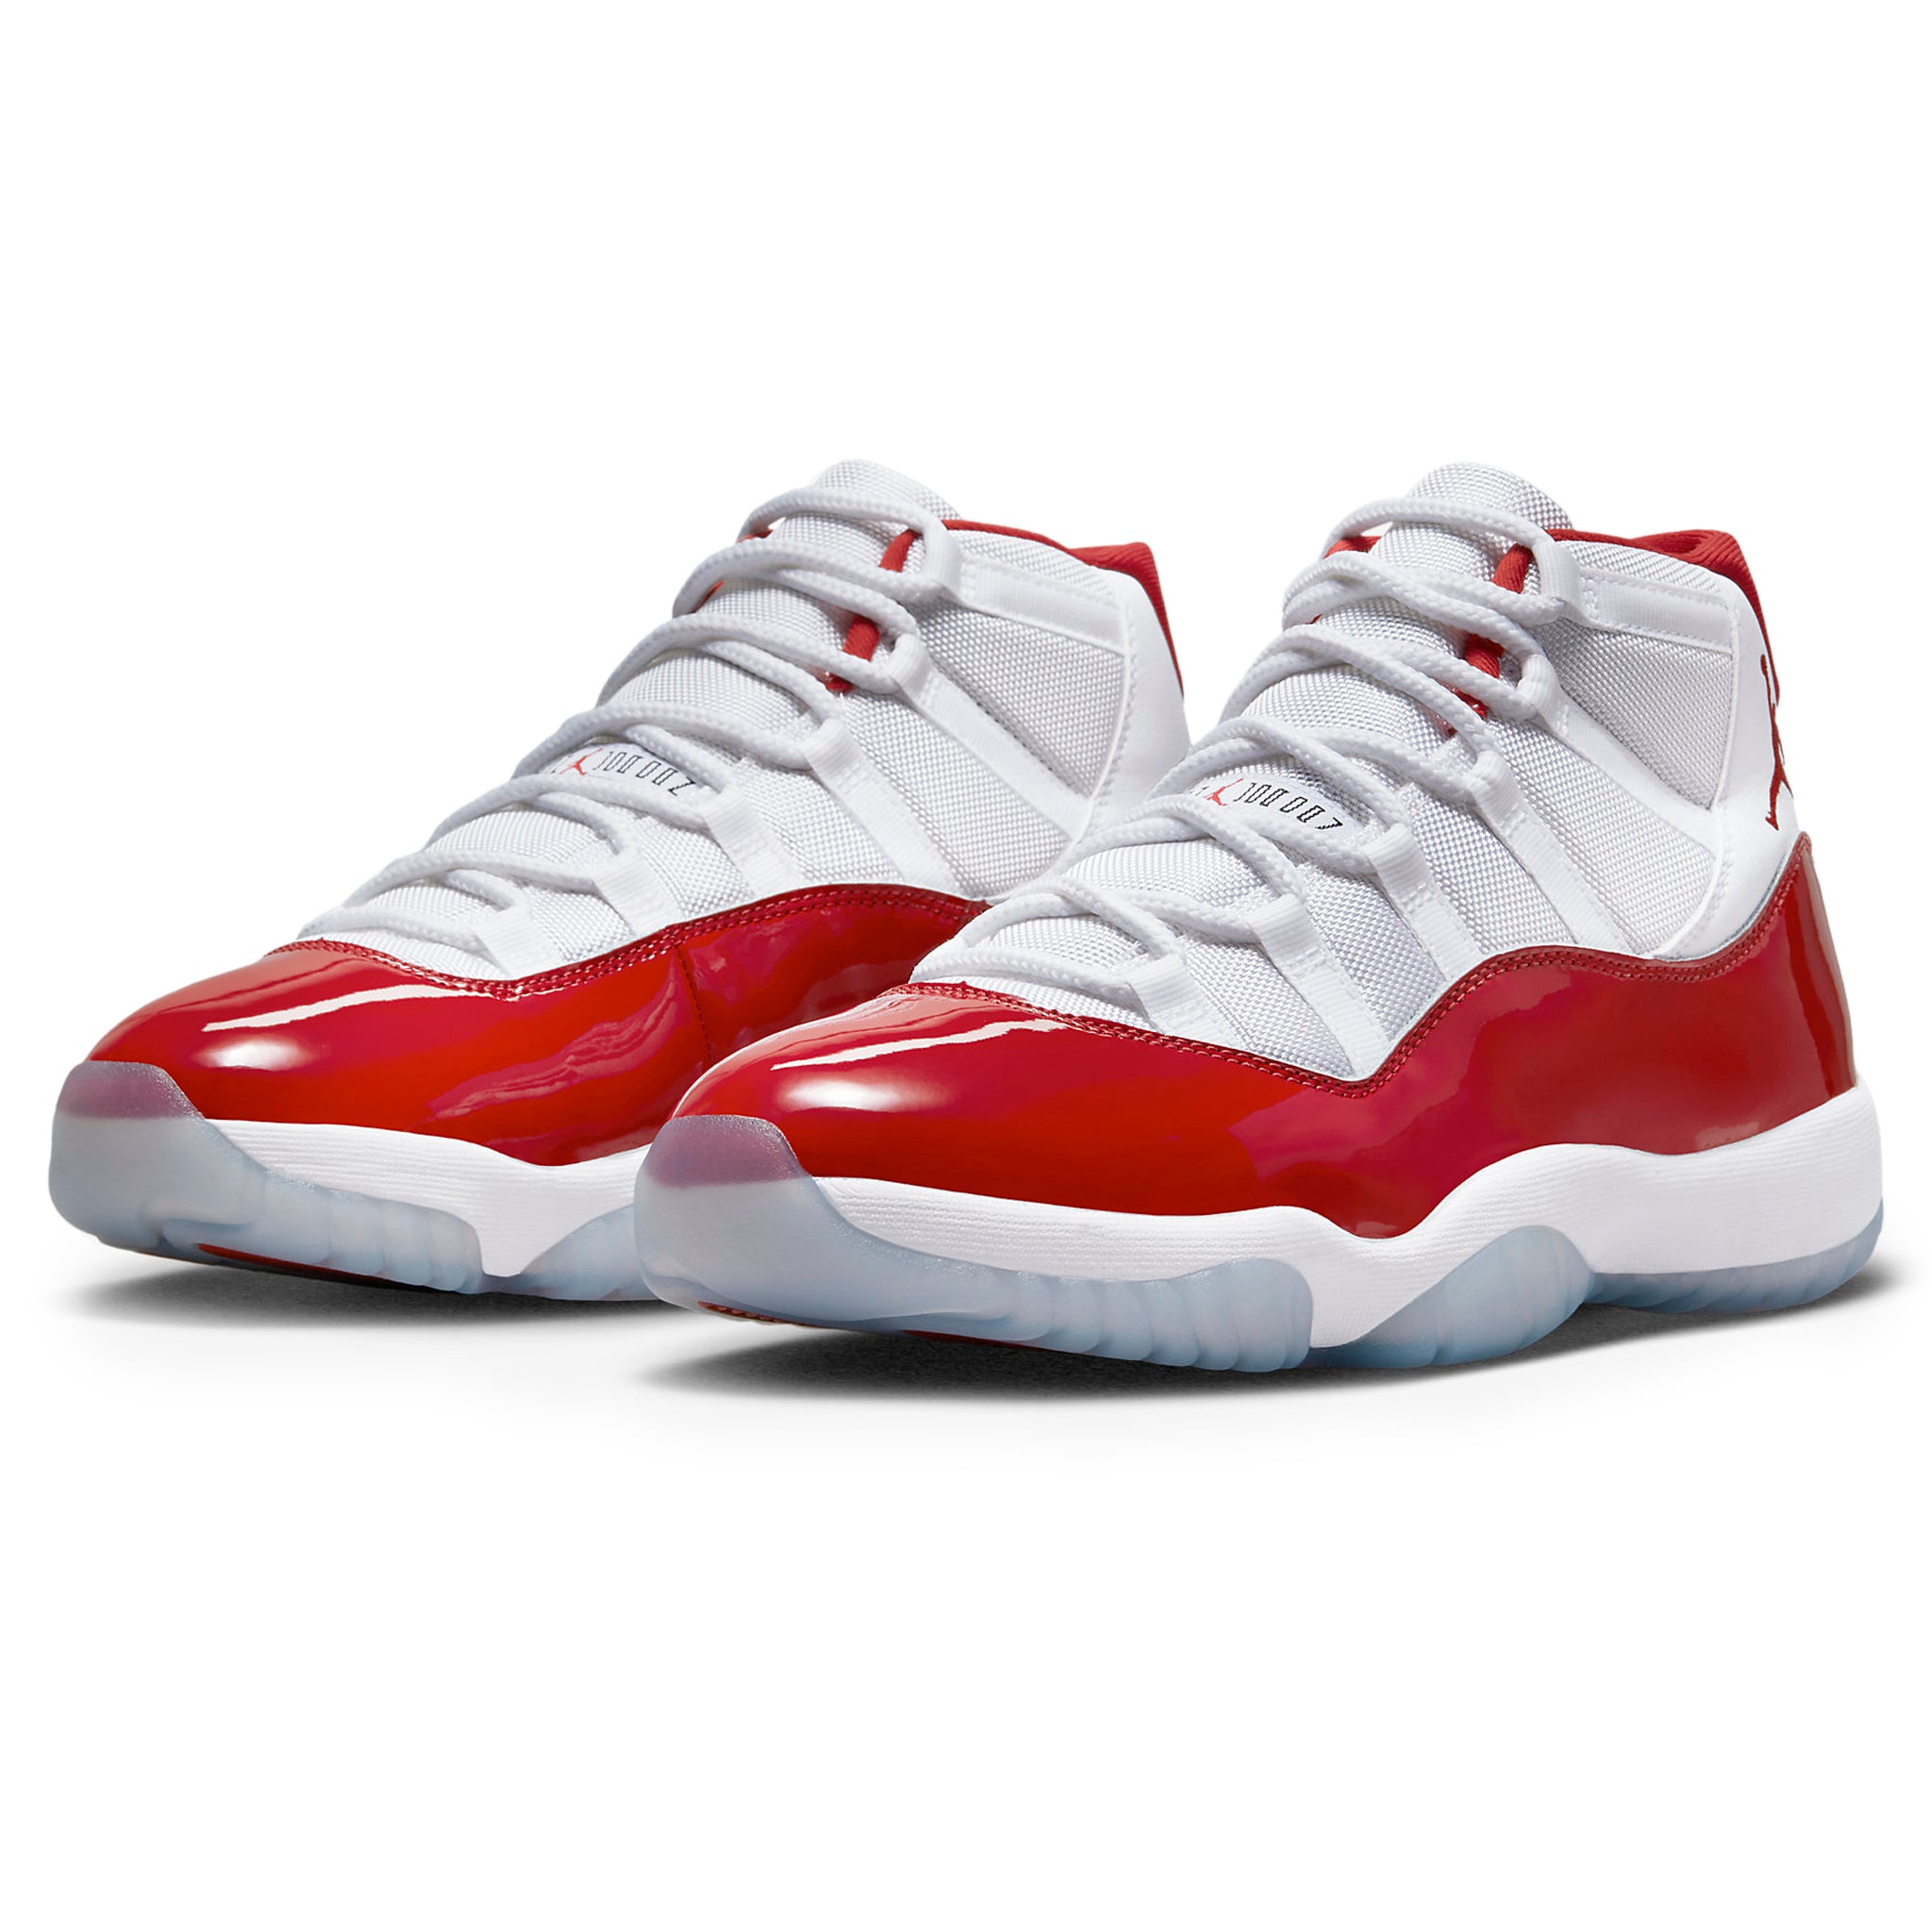 Front side view of Air Jordan 11 Retro Cherry (2022) CT8012-116